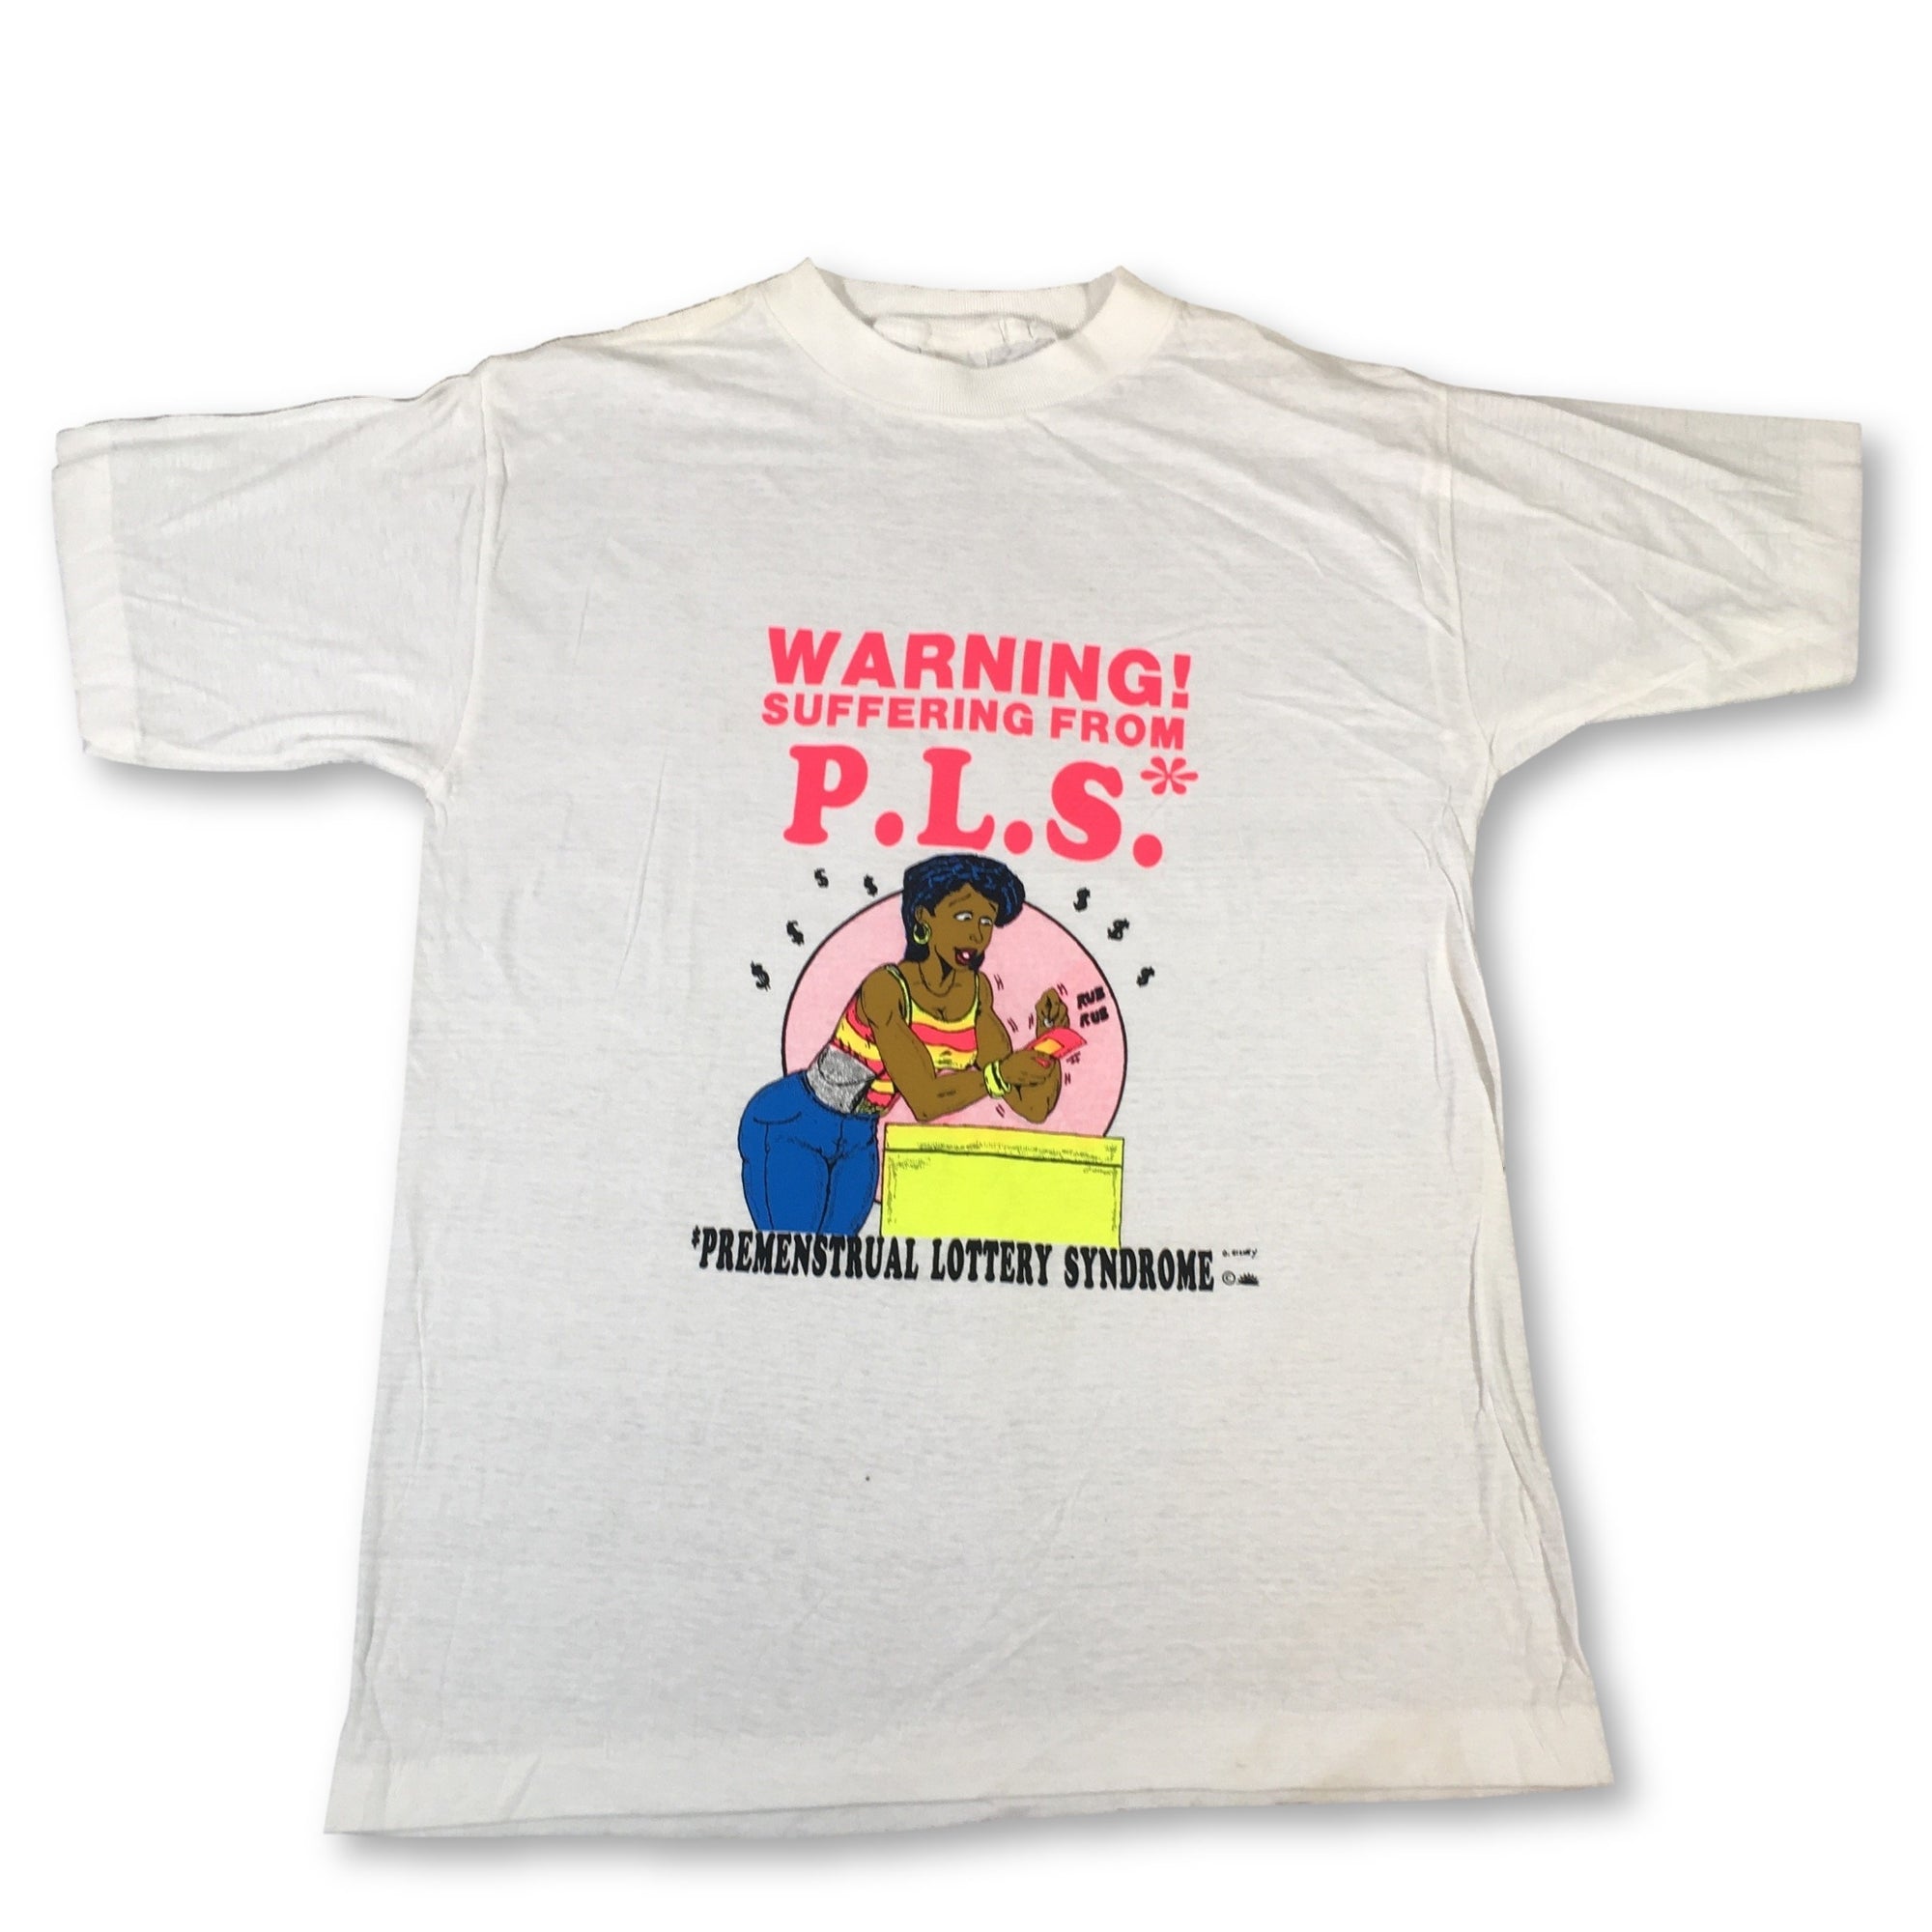 Vintage Suffering From "P.L.S." T-Shirt - jointcustodydc